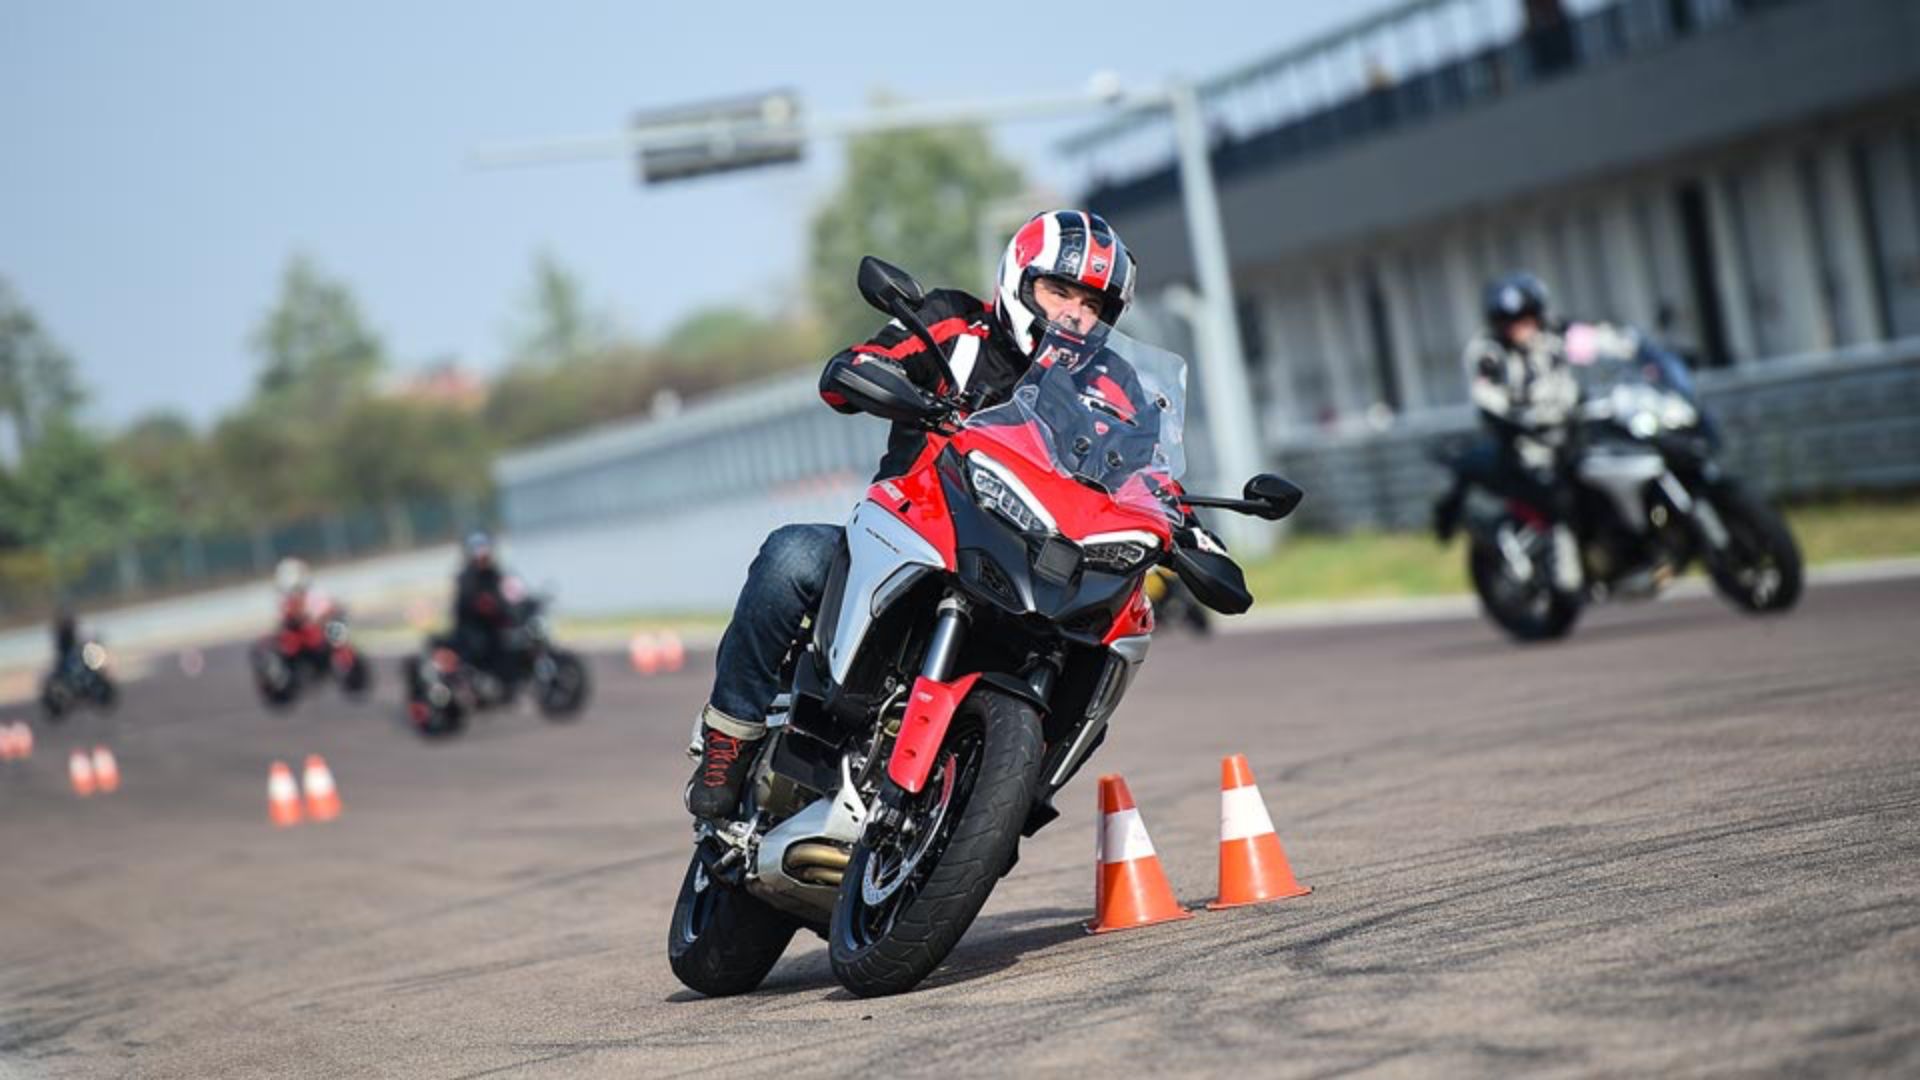 Ducati Riding Experience – Road Academy 2022